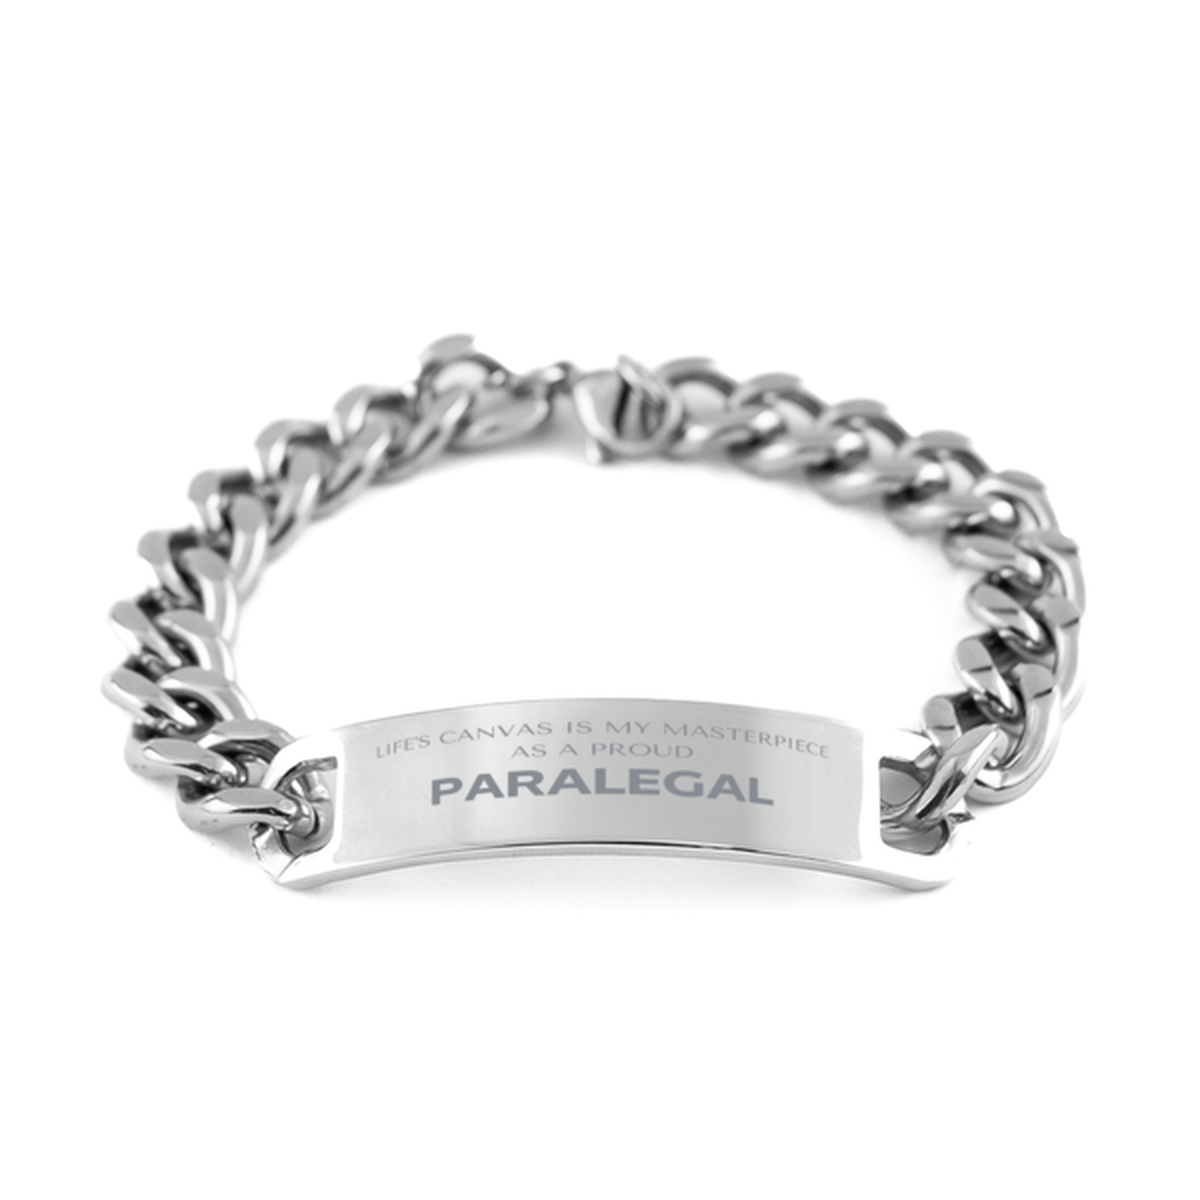 Proud Paralegal Gifts, Life's canvas is my masterpiece, Epic Birthday Christmas Unique Cuban Chain Stainless Steel Bracelet For Paralegal, Coworkers, Men, Women, Friends